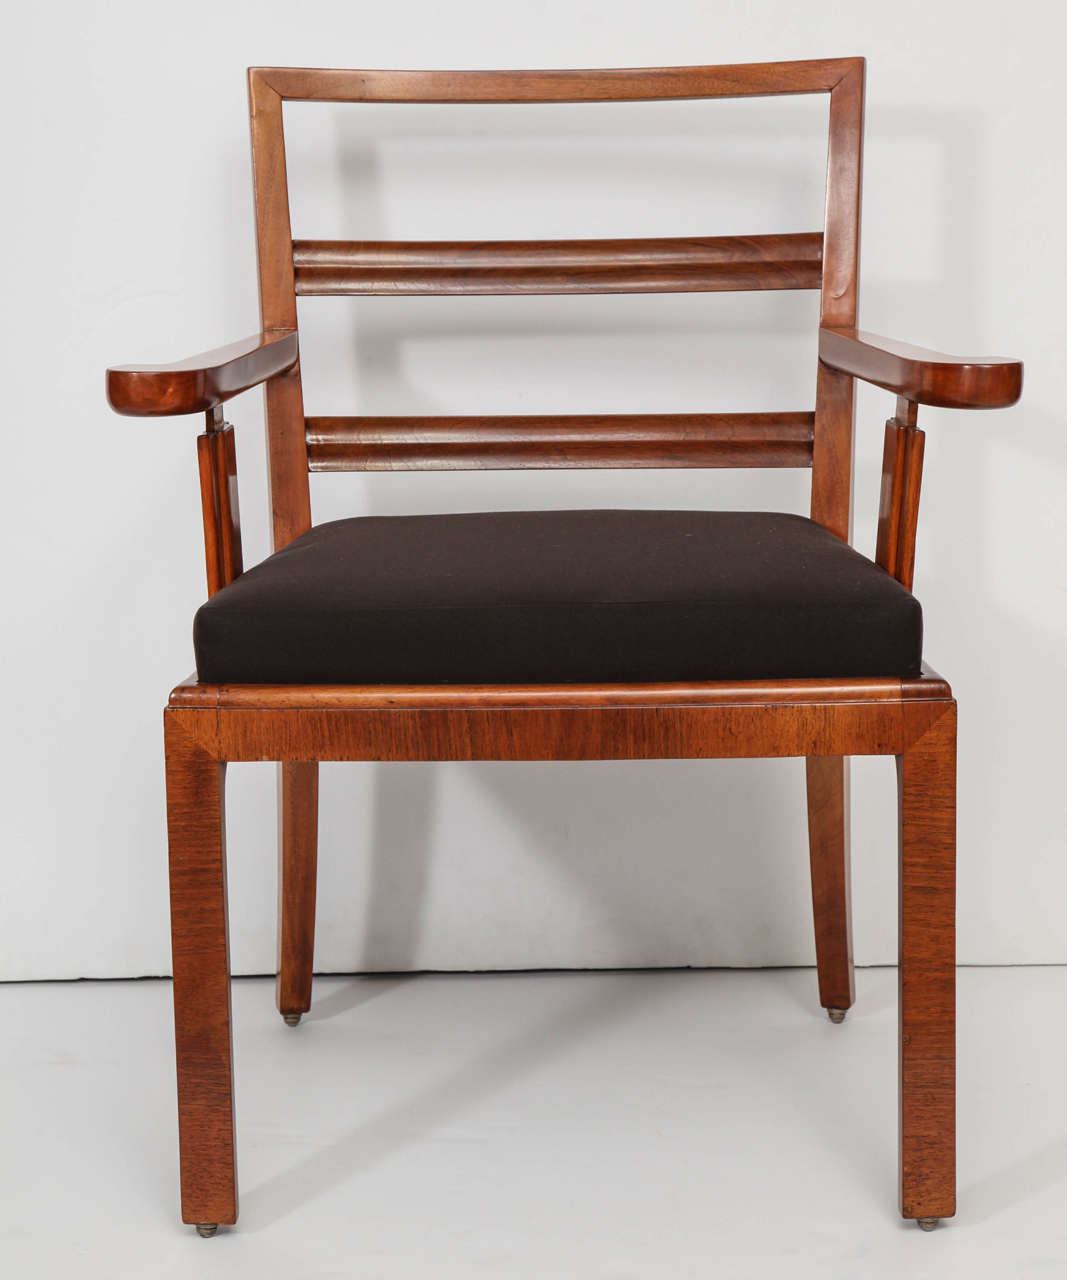 European walnut ladder-backed armchair attributed to Erik Chambert, circa 1940. Classically referenced form with an unusual "linenfold" detail to the arm supports. Newly French polished and reupholstered in natural linen.